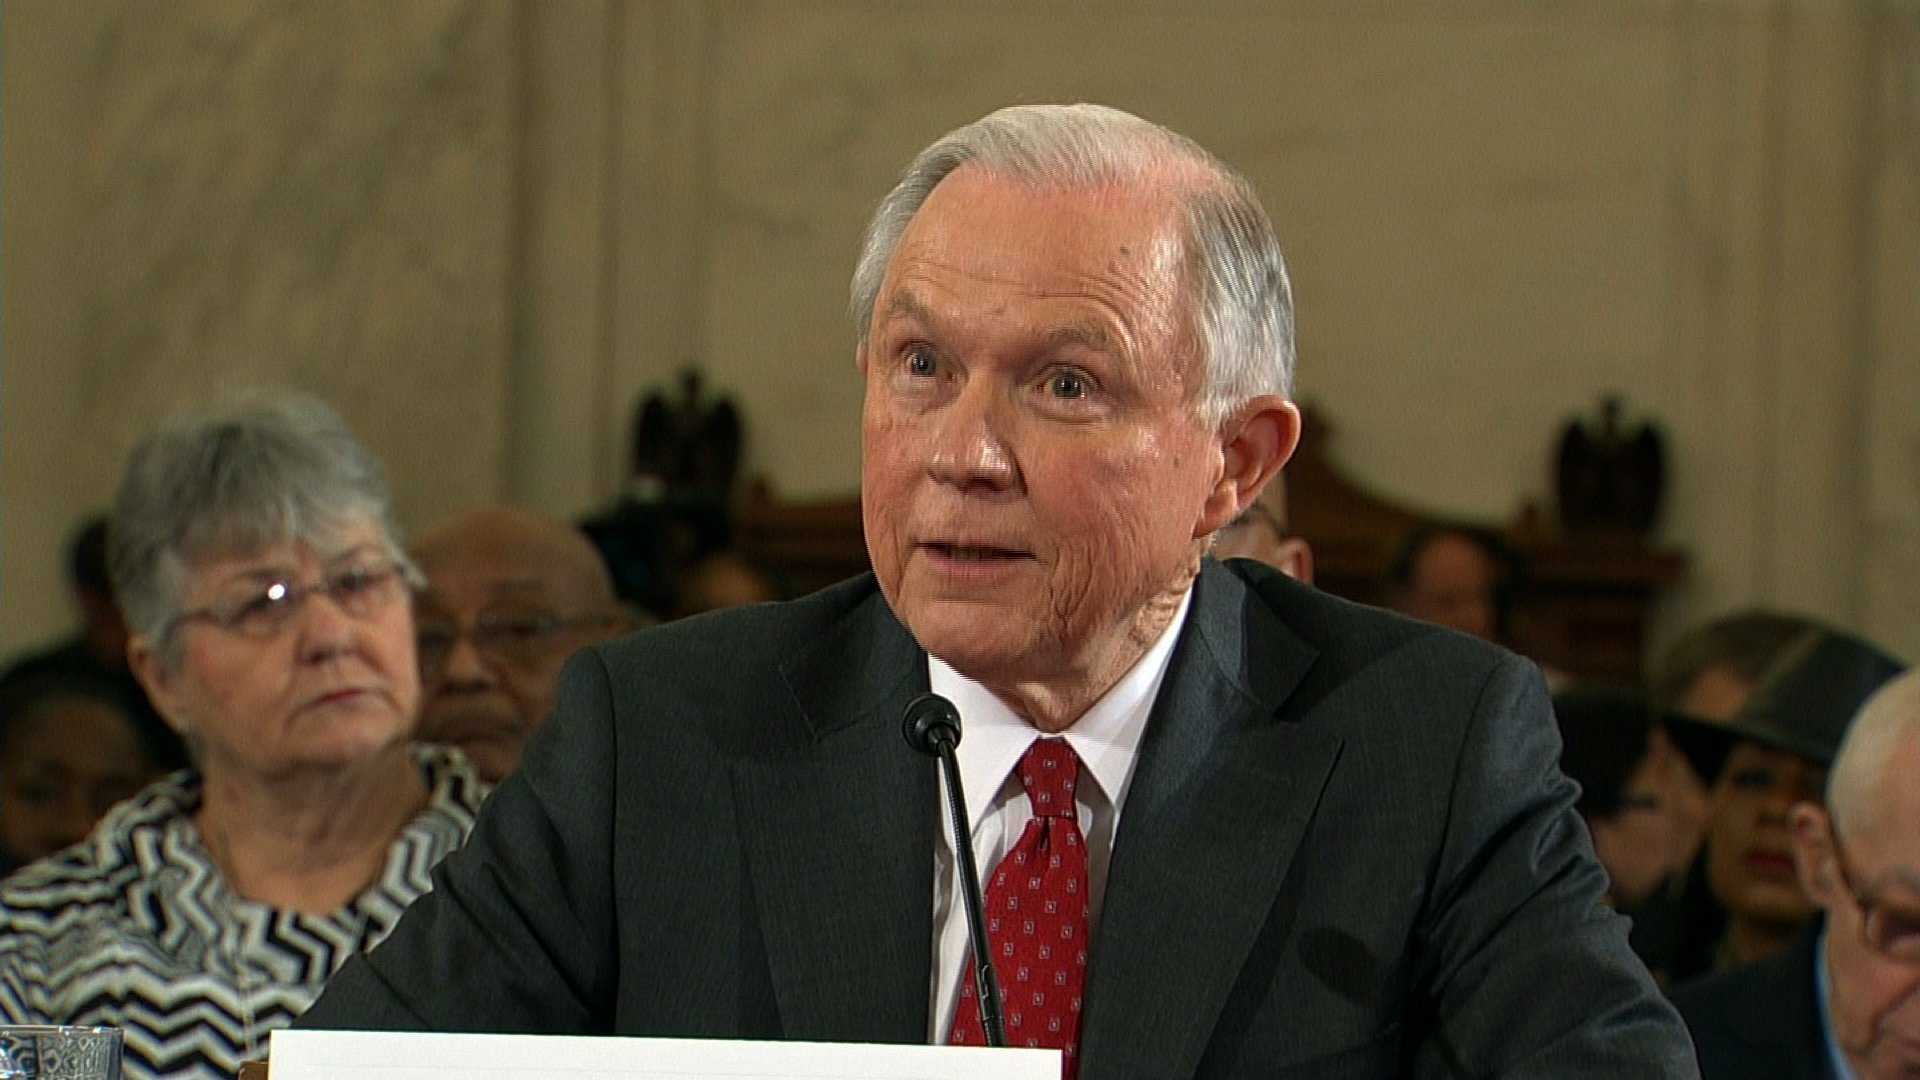 State AGs to Sessions: Rescind criminal charging guidance